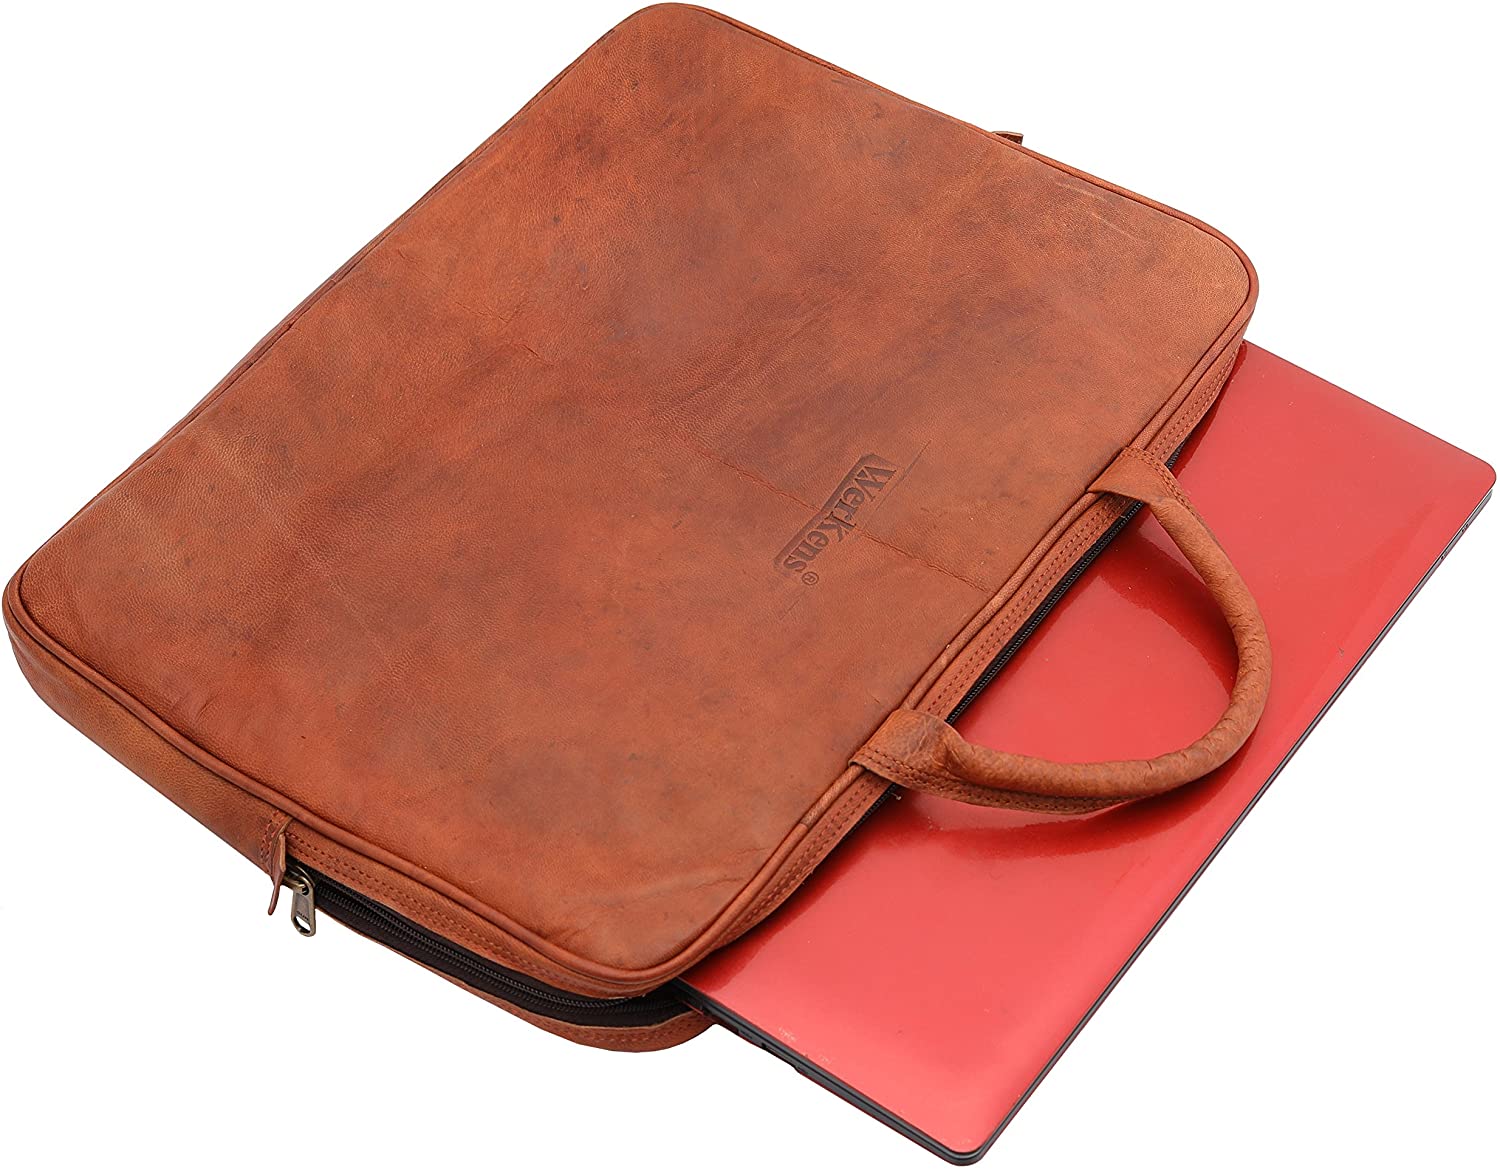 Alsek Leather Laptop Sleeve with Pocket - Leather Corporate Gift, Chestnut / 13 - 14